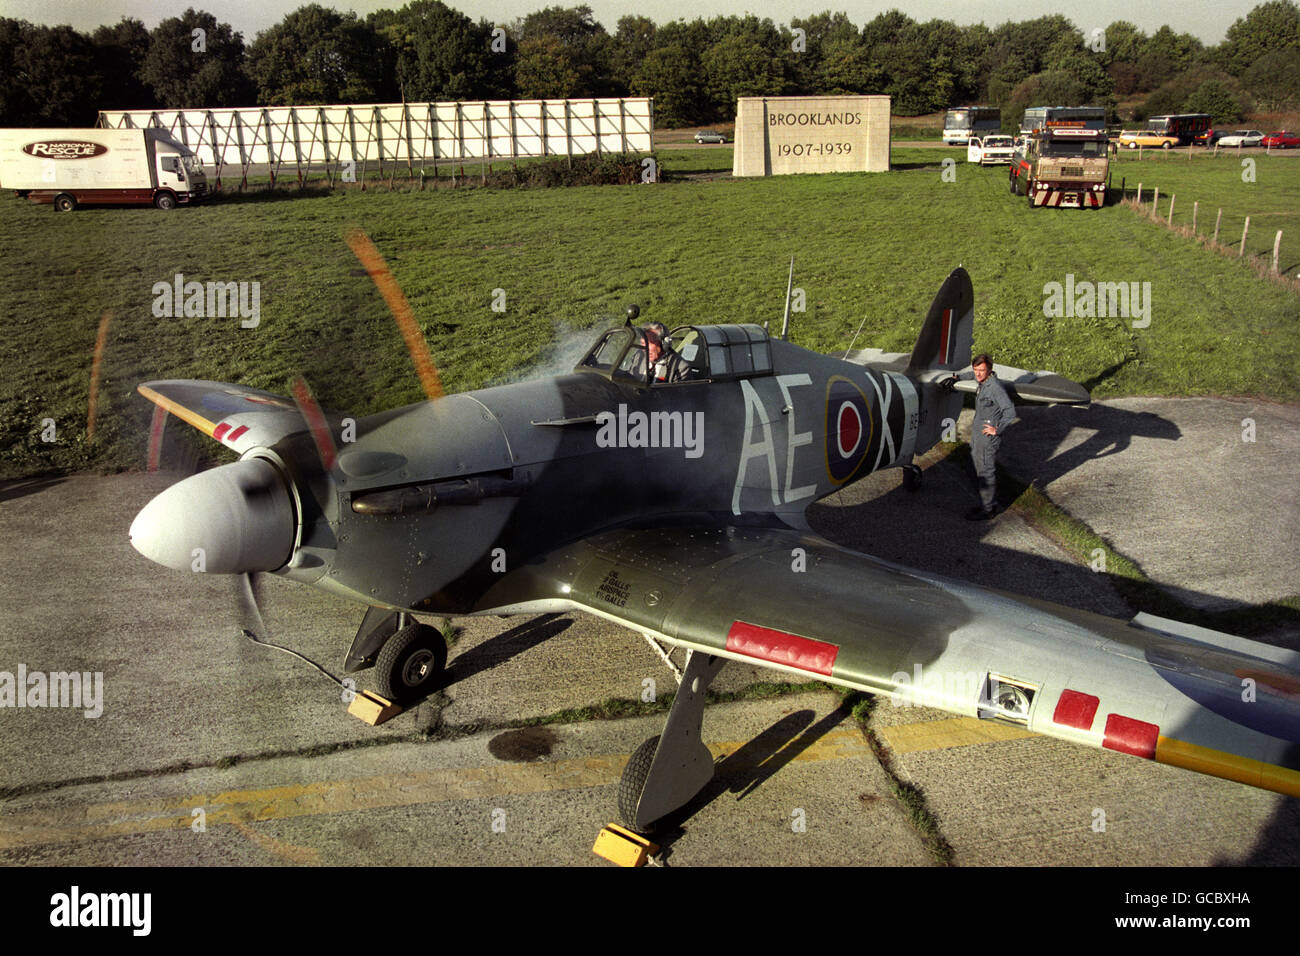 A rebuilt Hawker Hurricane fighter plane starting up its engine for the first time at Brooklands on the 60th anniversary of the first Hurricane flight at Brooklands on 6th November 1935. At the controls is former wartime pilot and Hawker test pilot, Bill Bedford. Stock Photo